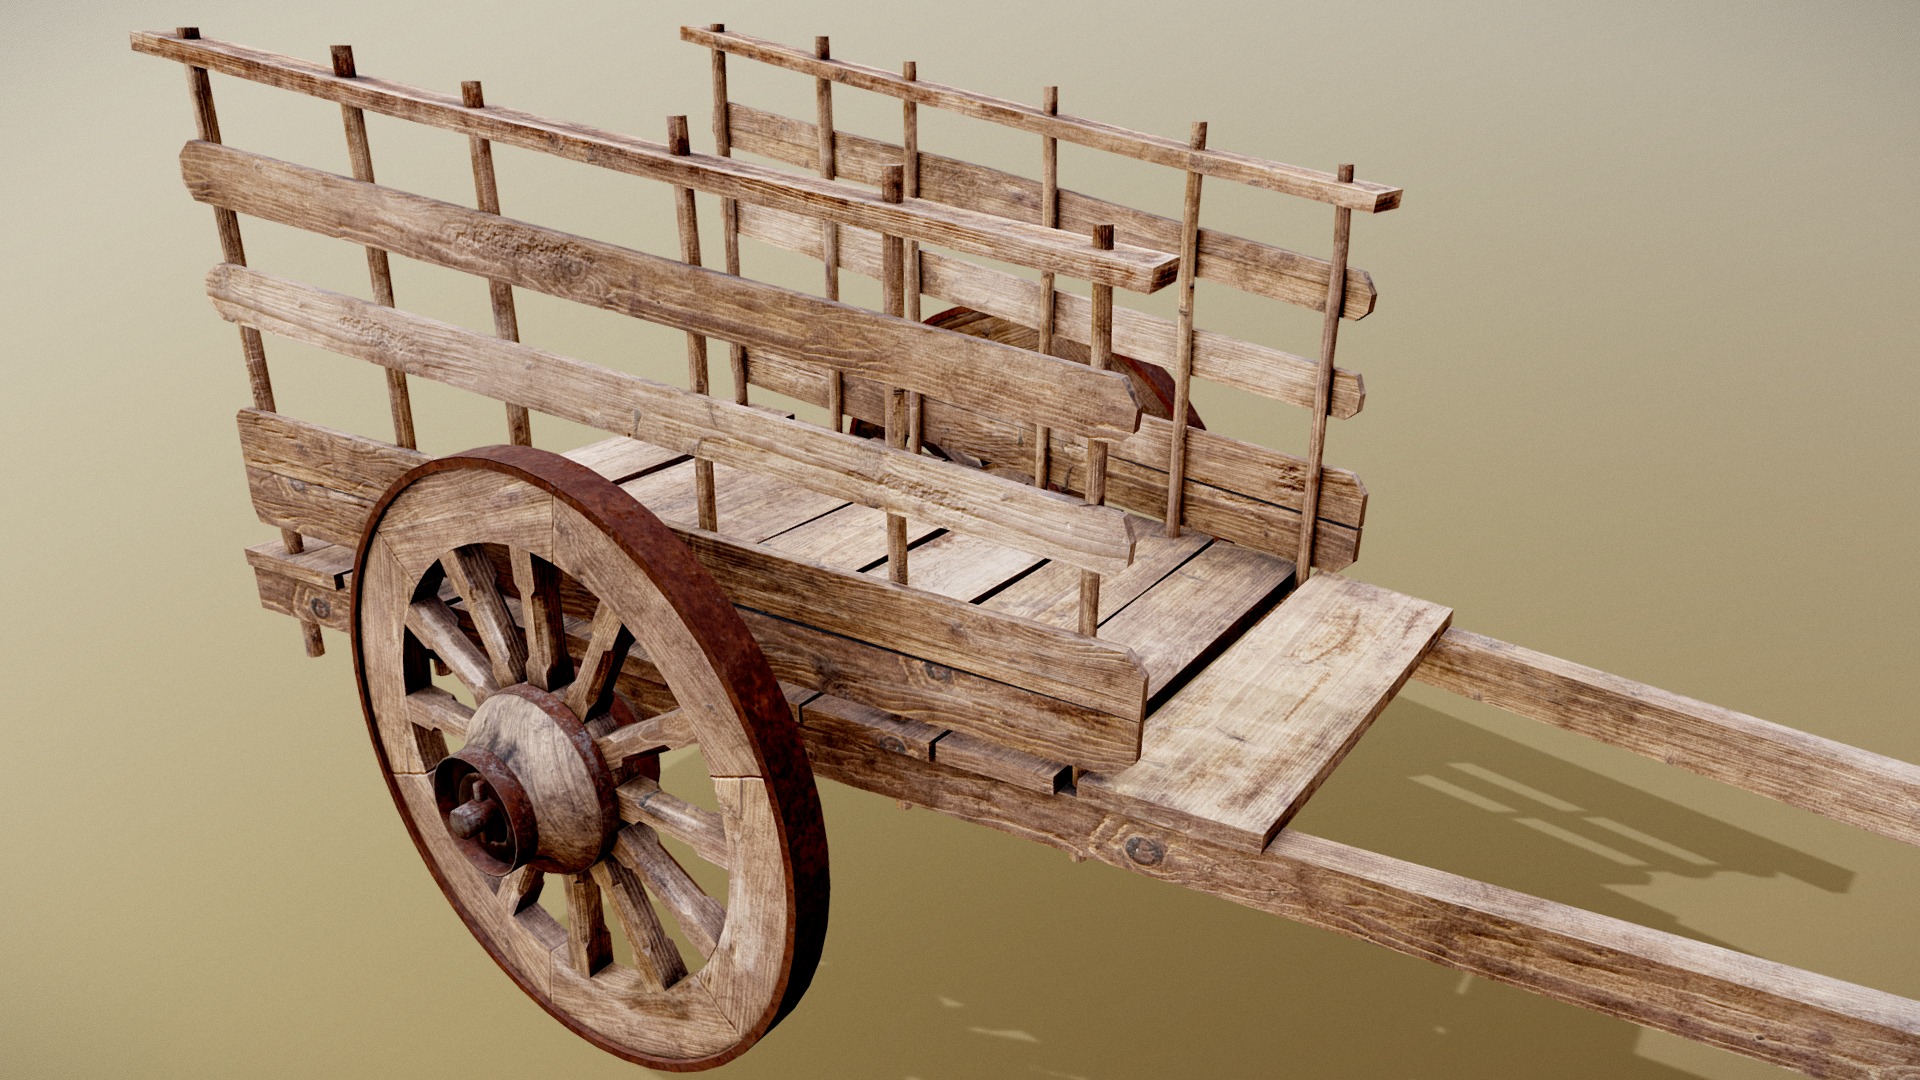 3D model Old Wooden Cart – Carreta - This is a 3D model of the Old Wooden Cart - Carreta. The 3D model is about a wooden wheel on a wooden platform.